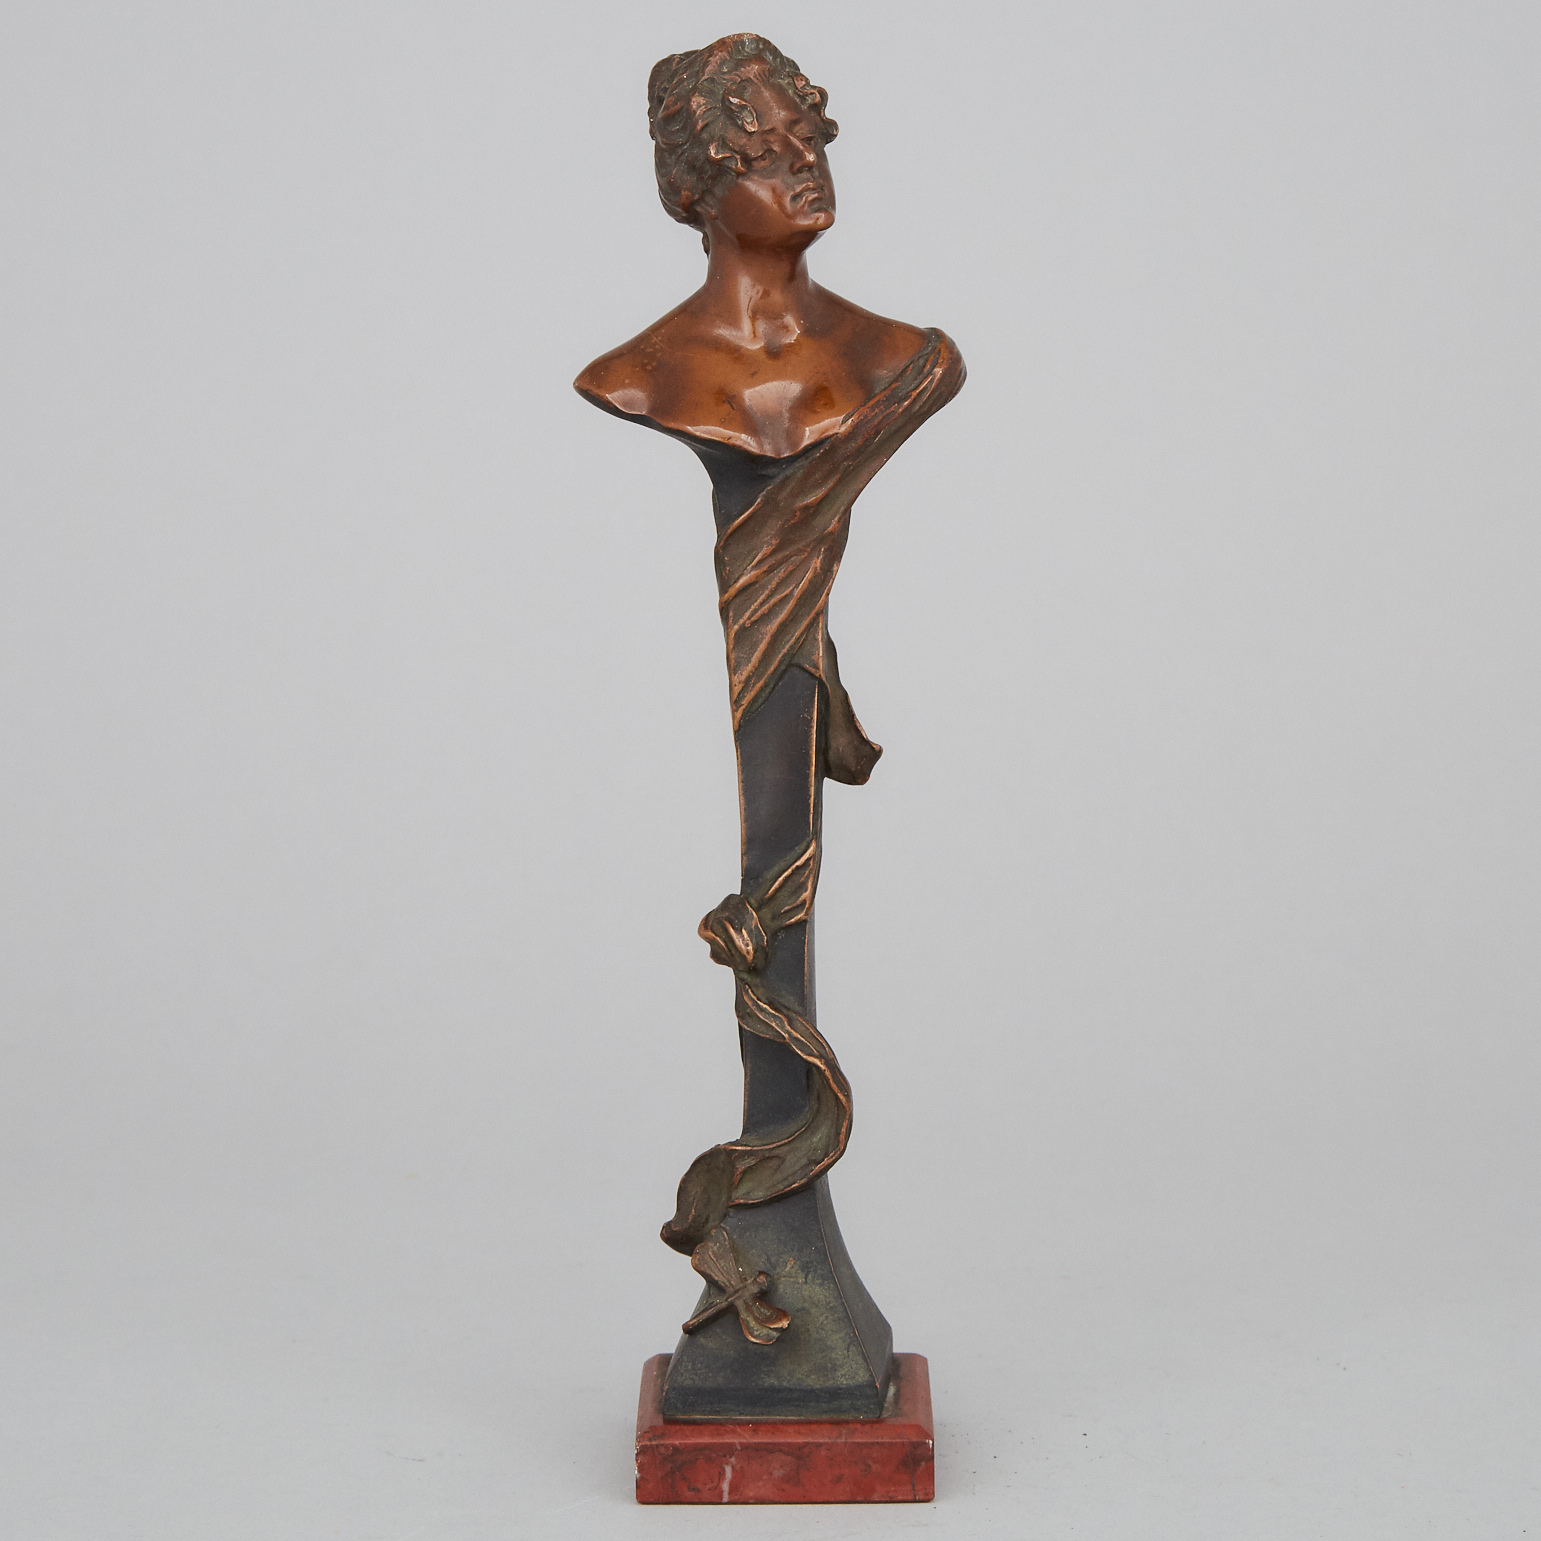 Small Art Nouveau Bronze Bust on Stand by Prof. Amedeo Neri, c.1902